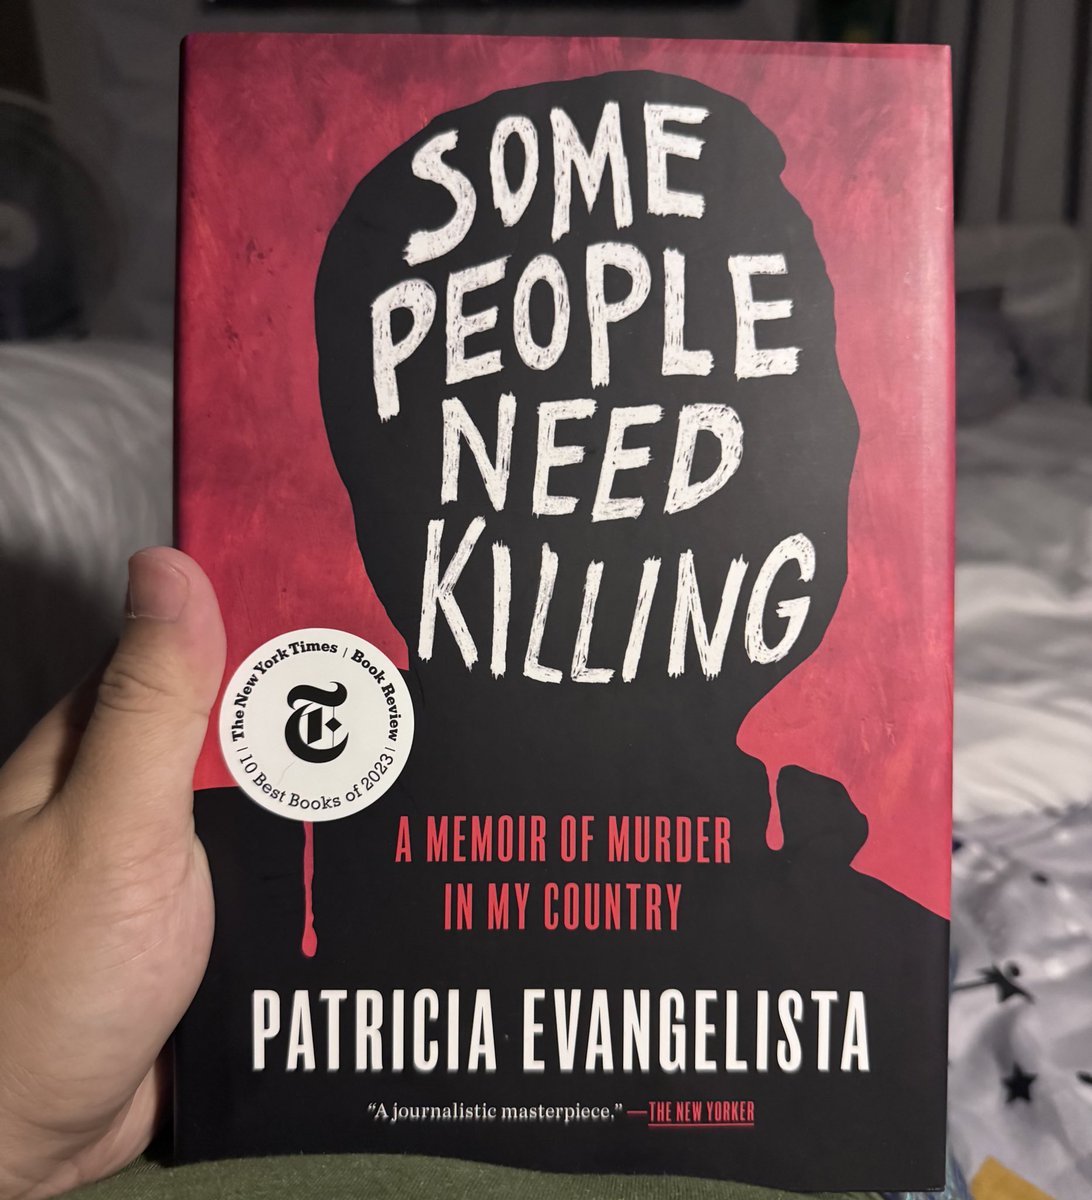 Grabe ka @patevangelista! 

I'm only on pages 6-8 and I'm already getting chills. I can't imagine how a man can kill the parents in front of their children. It's heartbreaking. #SomePeopleNeedKilling #SadTimes